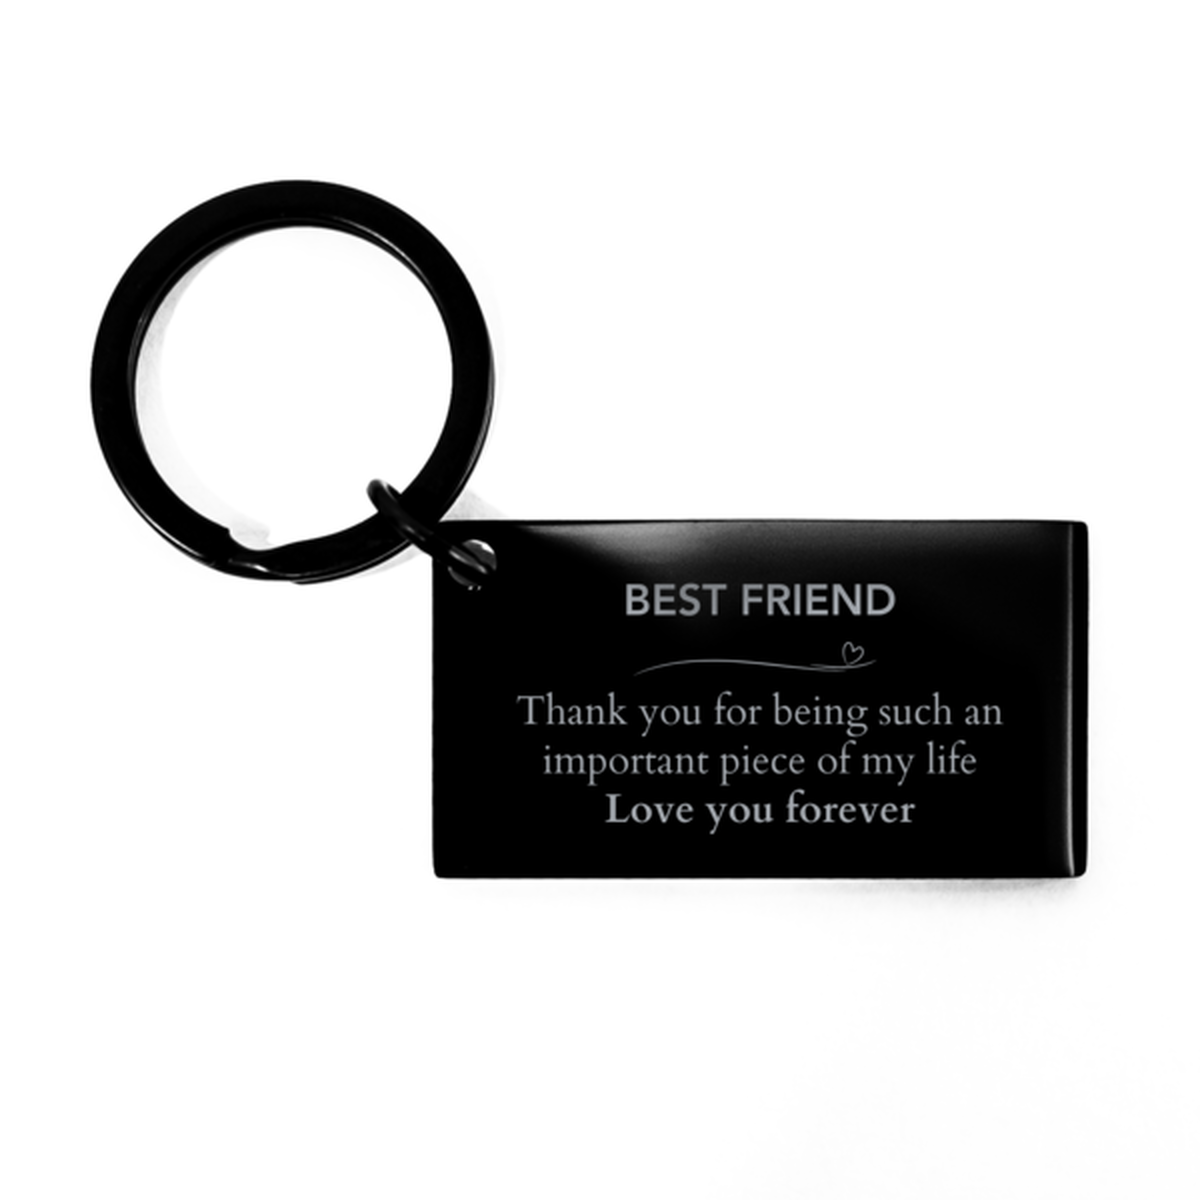 Appropriate Best Friend Keychain Epic Birthday Gifts for Best Friend Thank you for being such an important piece of my life Best Friend Christmas Mothers Fathers Day